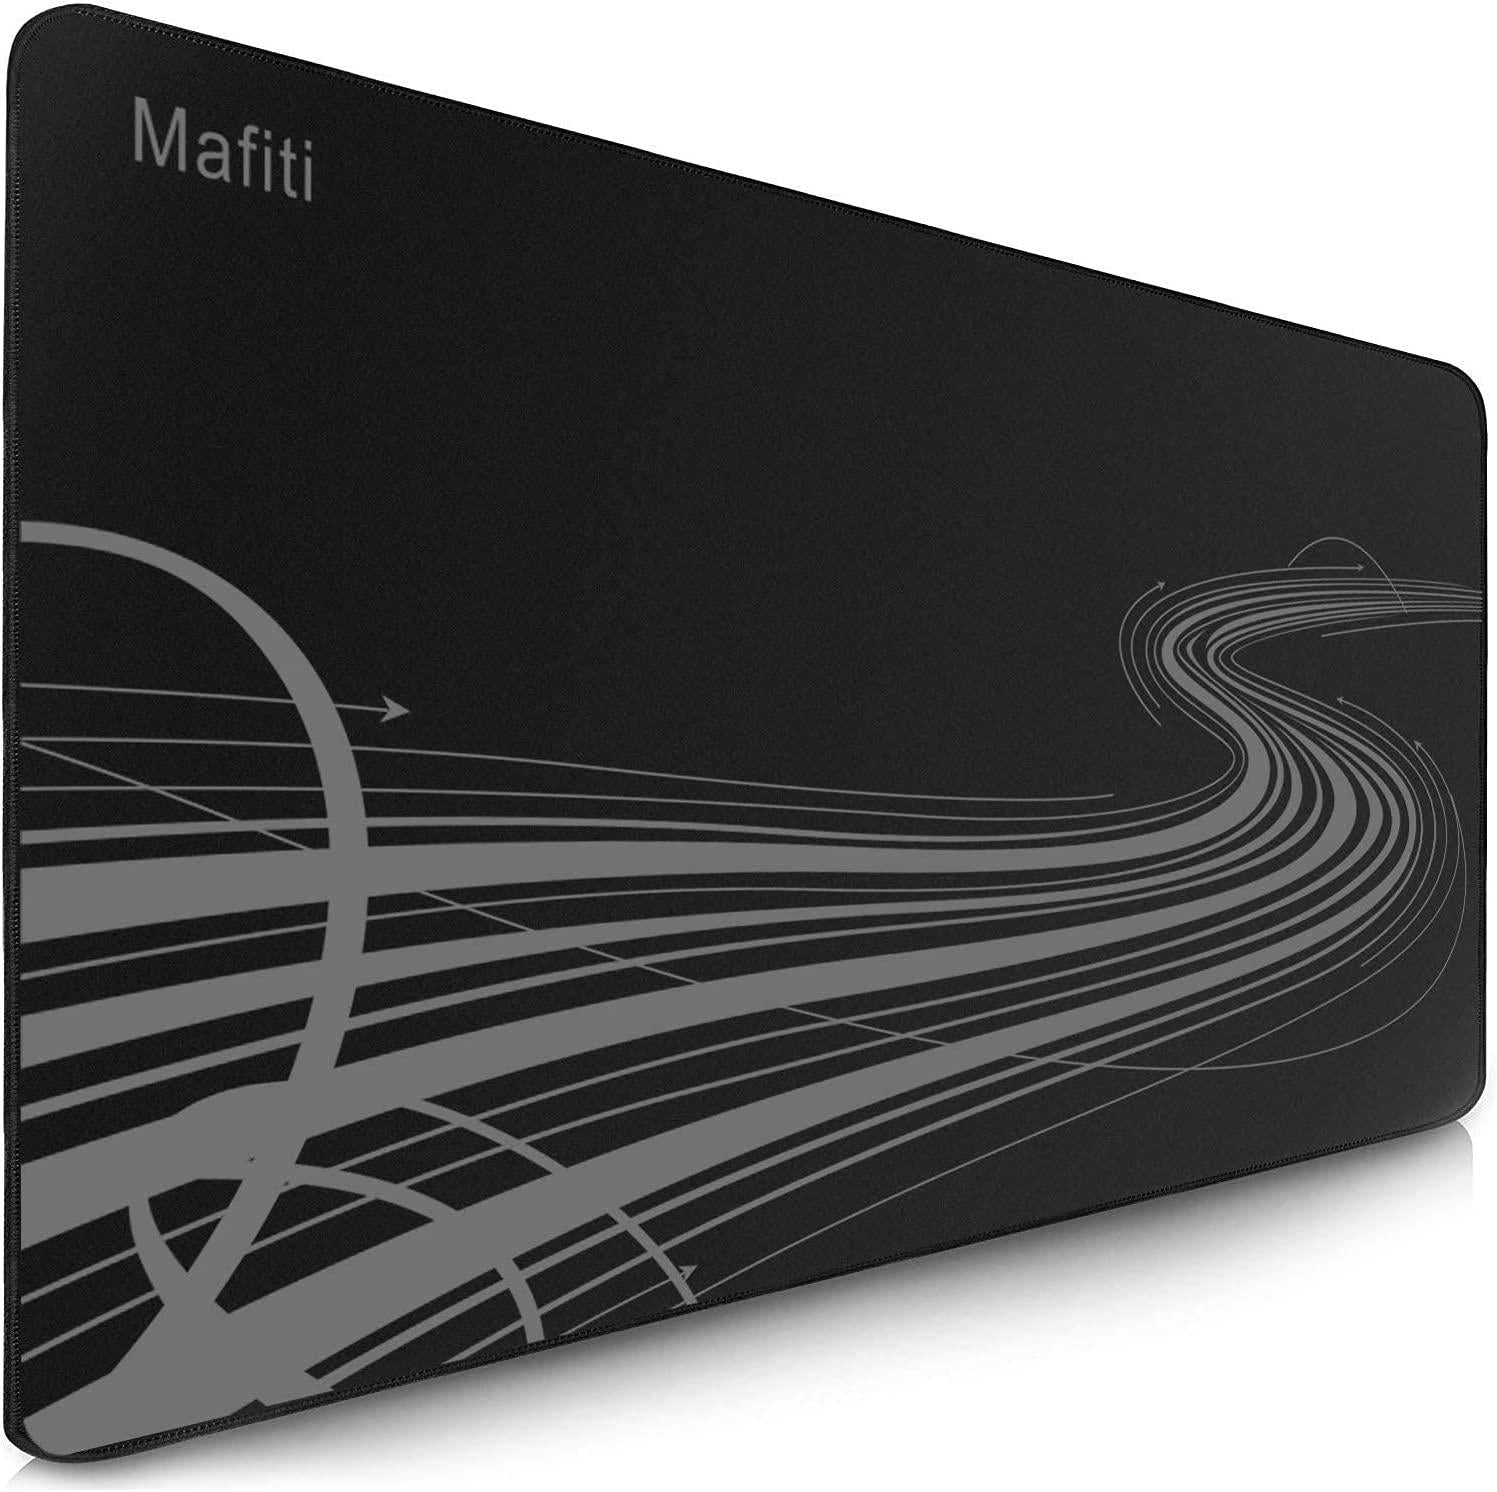 mafiti, Large Extended Gaming Mouse Pad with Stitched Edges, 35.4x15.7x0.17Inch Extra Large Mouse Pad Long Desk Pad Keyboard Mat, Non-Slip Base, Water-Resistant, for Work and Gaming, Office and Home, Black